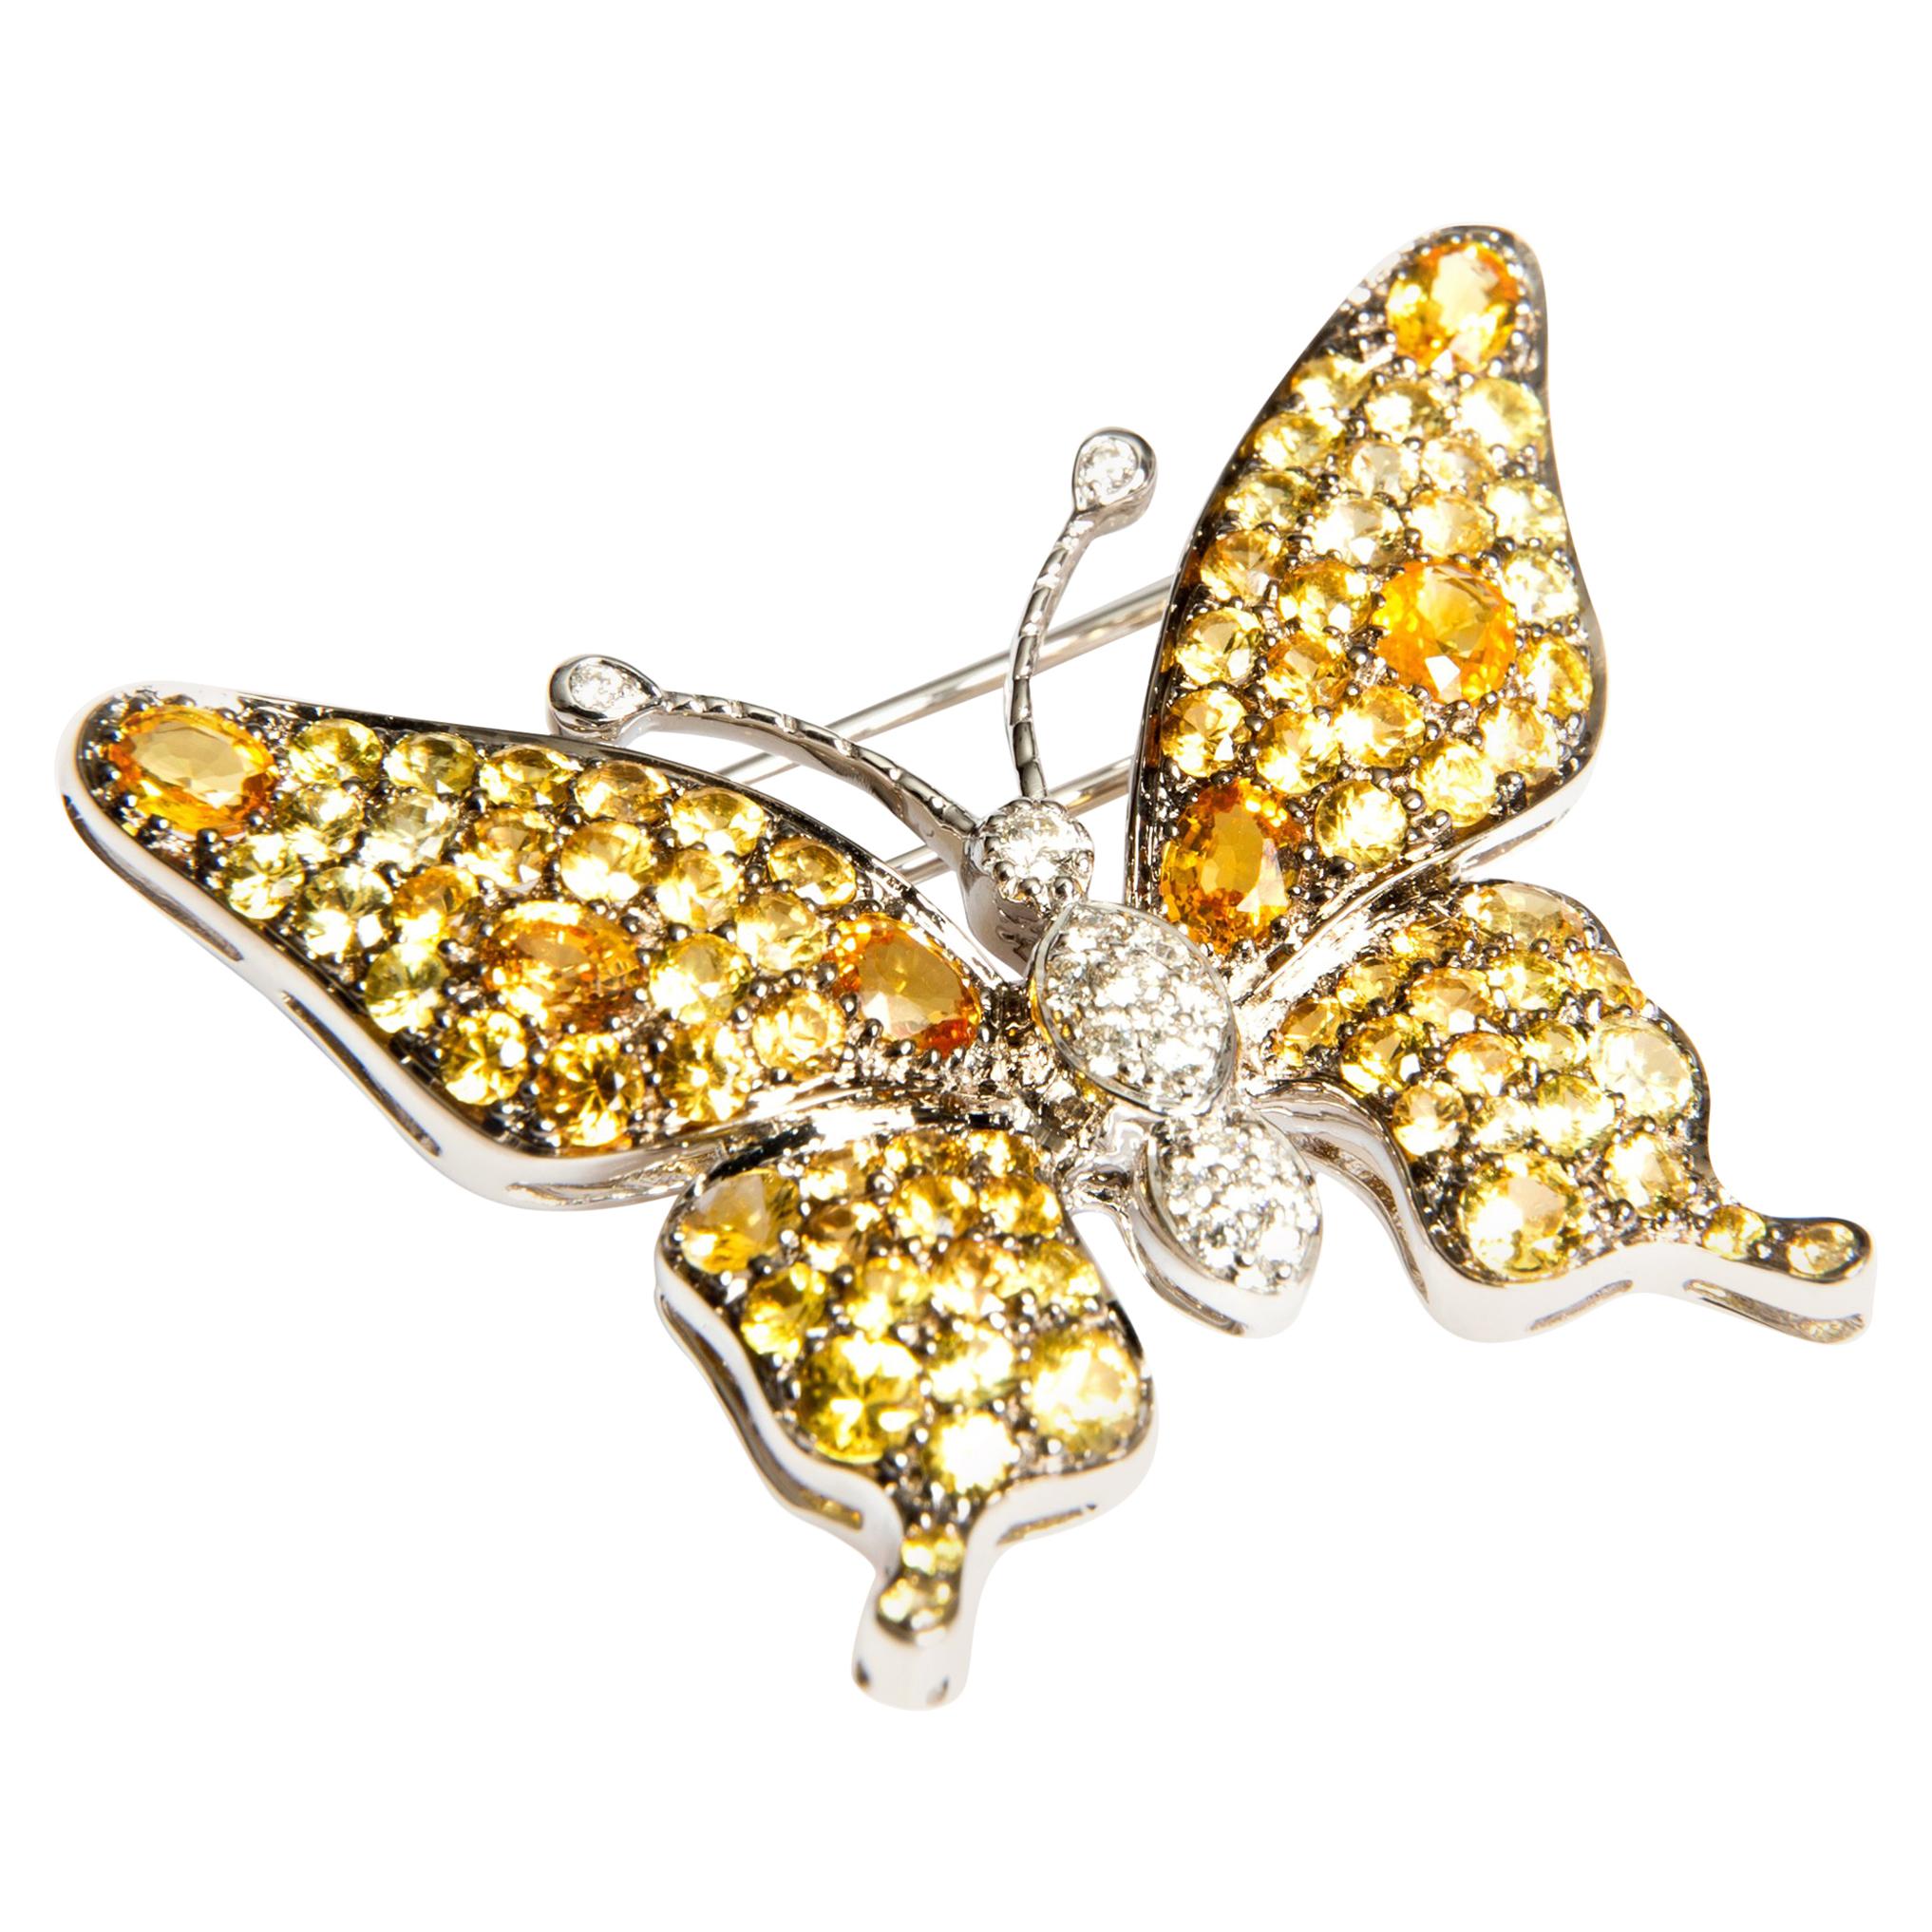 Set in 18K white gold, this glittering handcrafted brooch black rhodinated, features 17 diamonds 0.20 carat and 84 yellow sapphires 5.20 carats. 
Add a flutter of charm to any outfit with this elegant brooch. Perfect for weddings and special